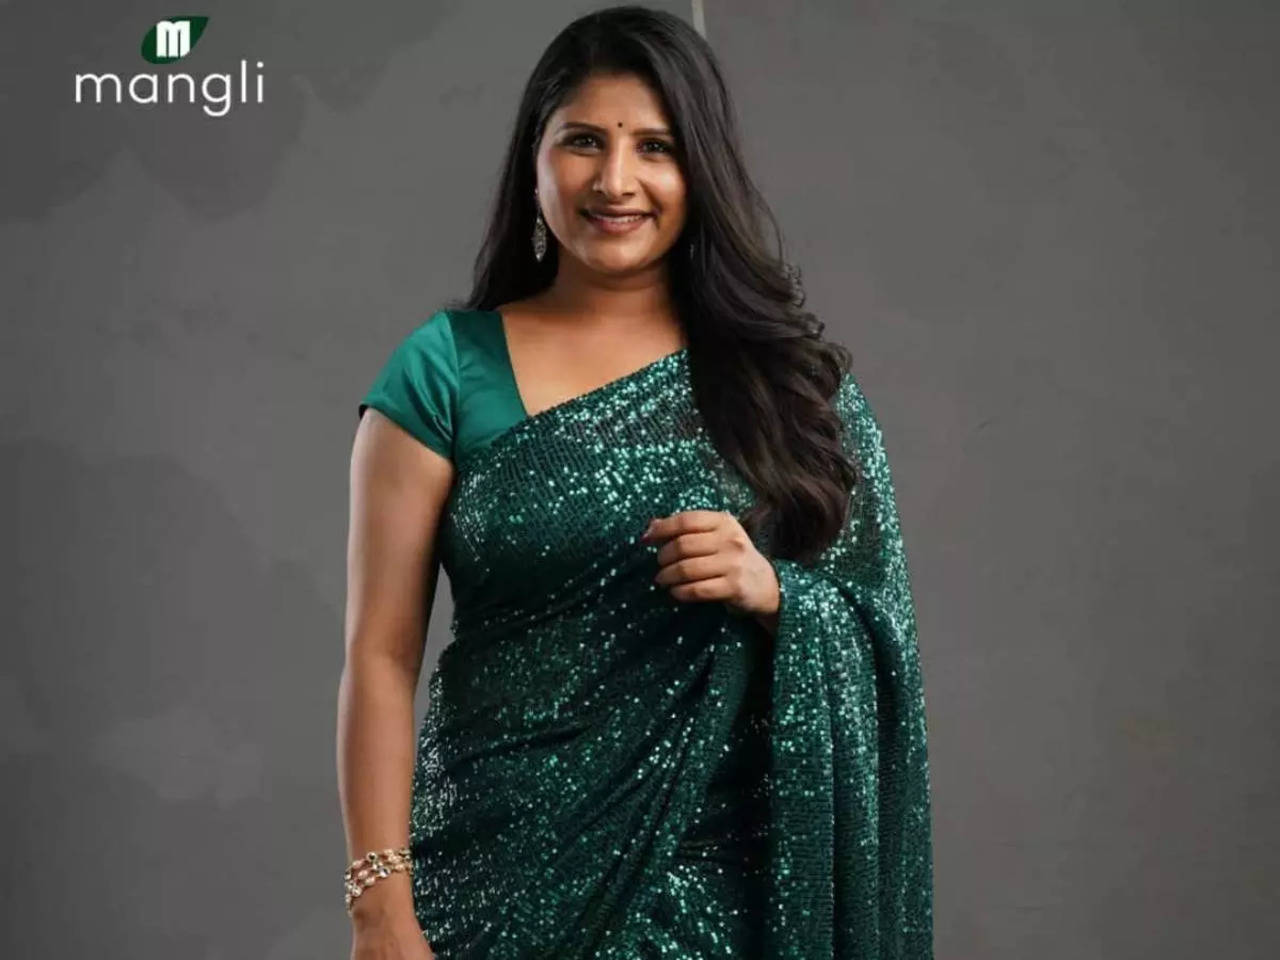 Mangli Xxx - Singer Mangli grooves to her latest track 'Oo Anthiya' from 'Pushpa' |  Kannada Movie News - Times of India